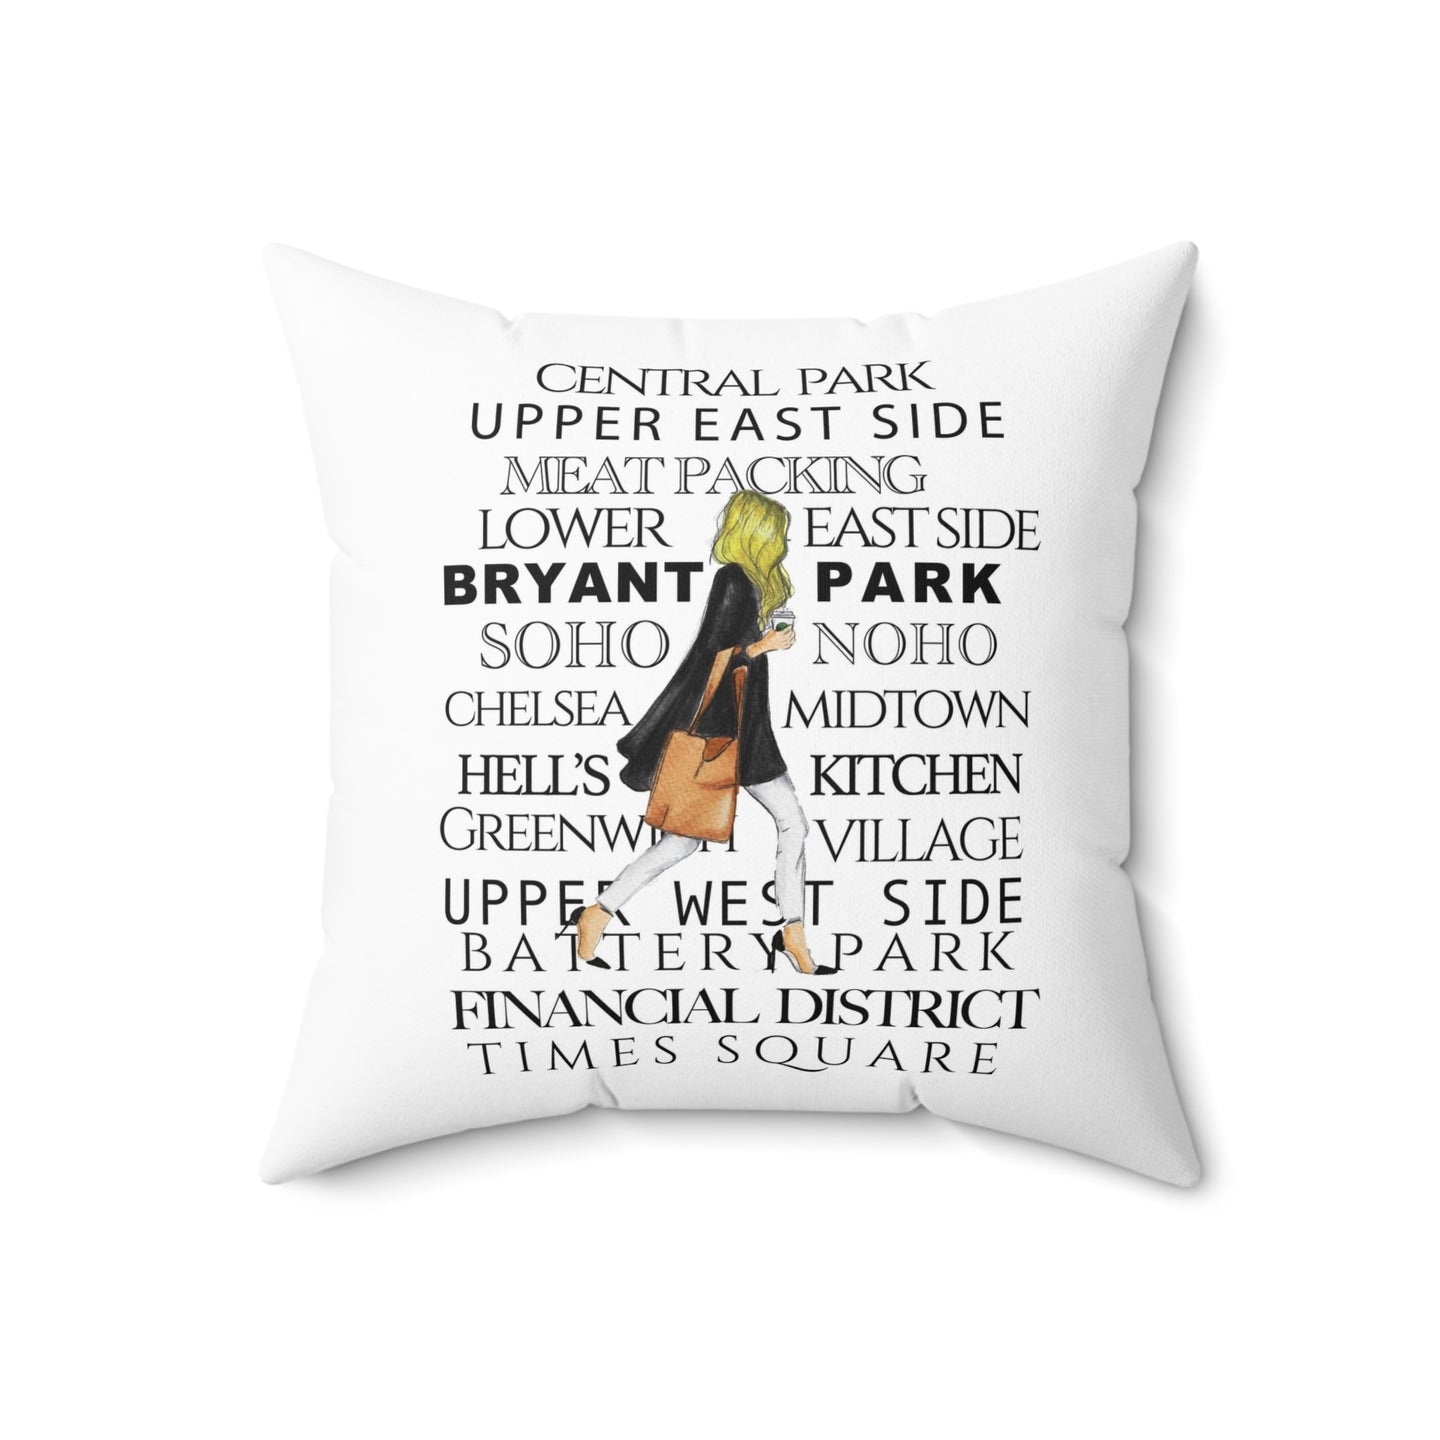 The New Yorker (Blonde) Pillow